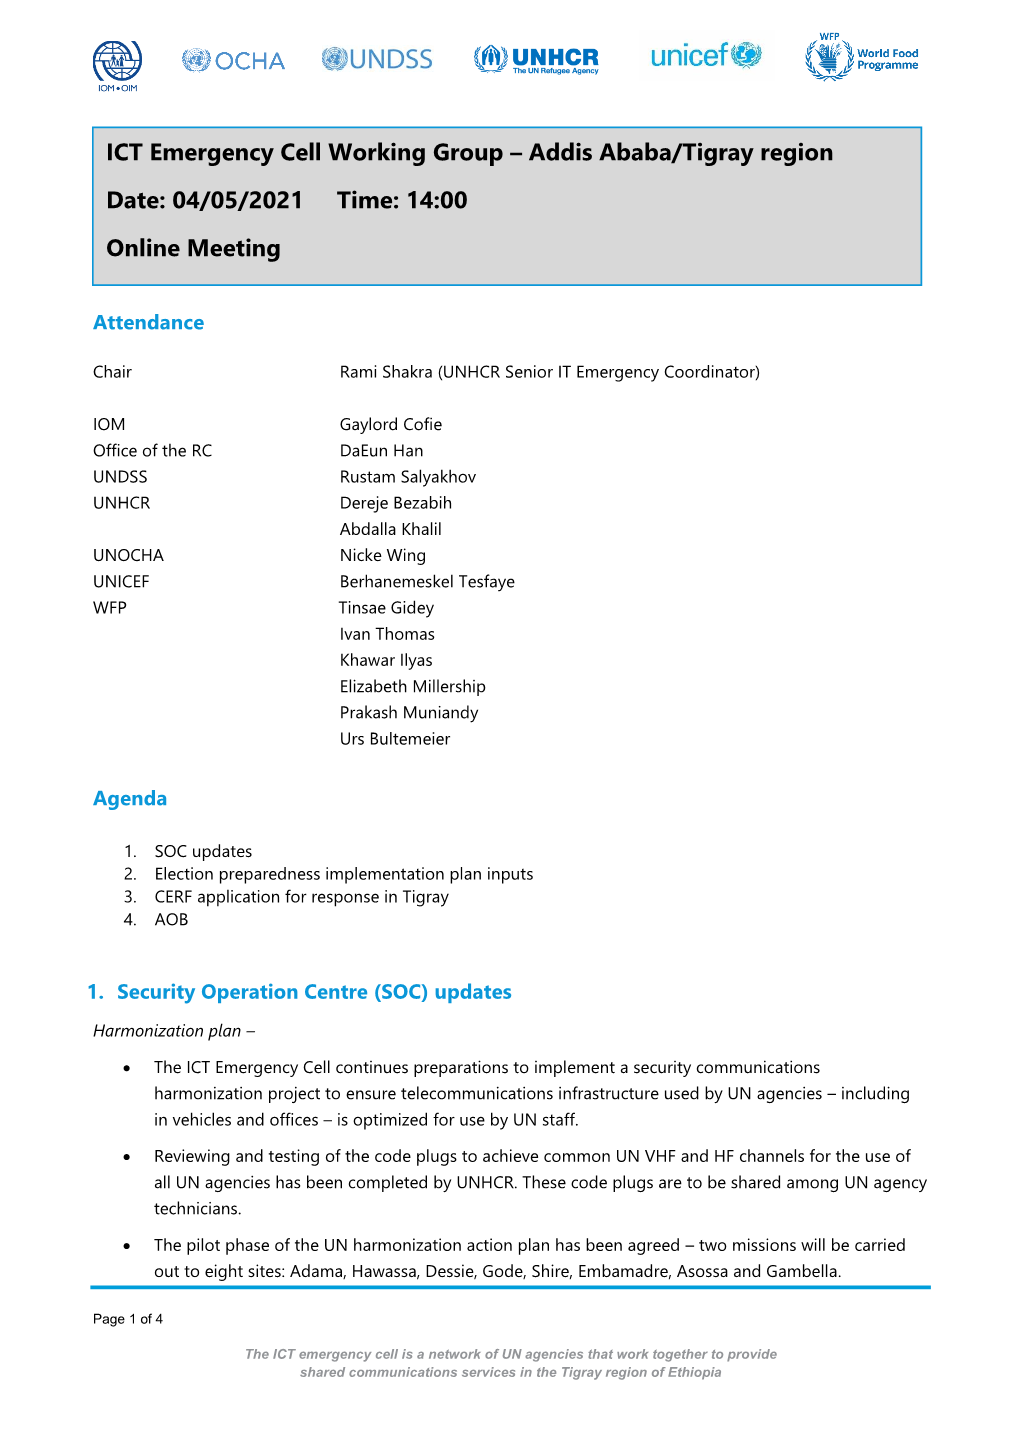 ICT Emergency Cell Working Group – Addis Ababa/Tigray Region Date: 04/05/2021 Time: 14:00 Online Meeting